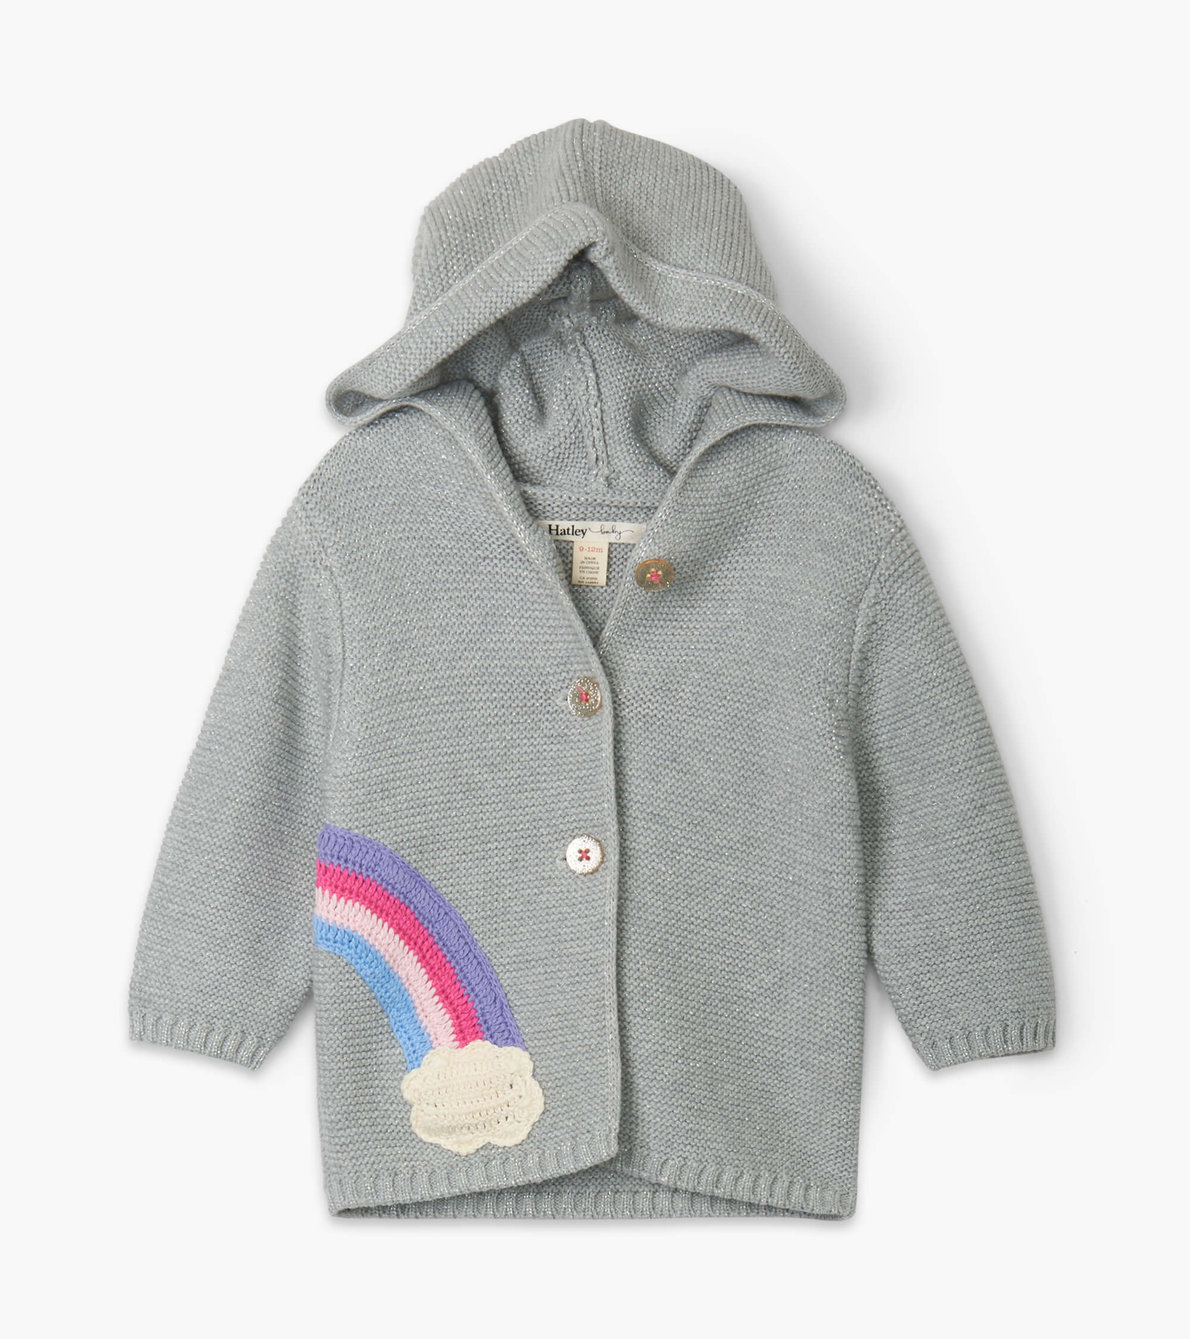 View larger image of Shimmer Grey Baby Sweater Hoodie